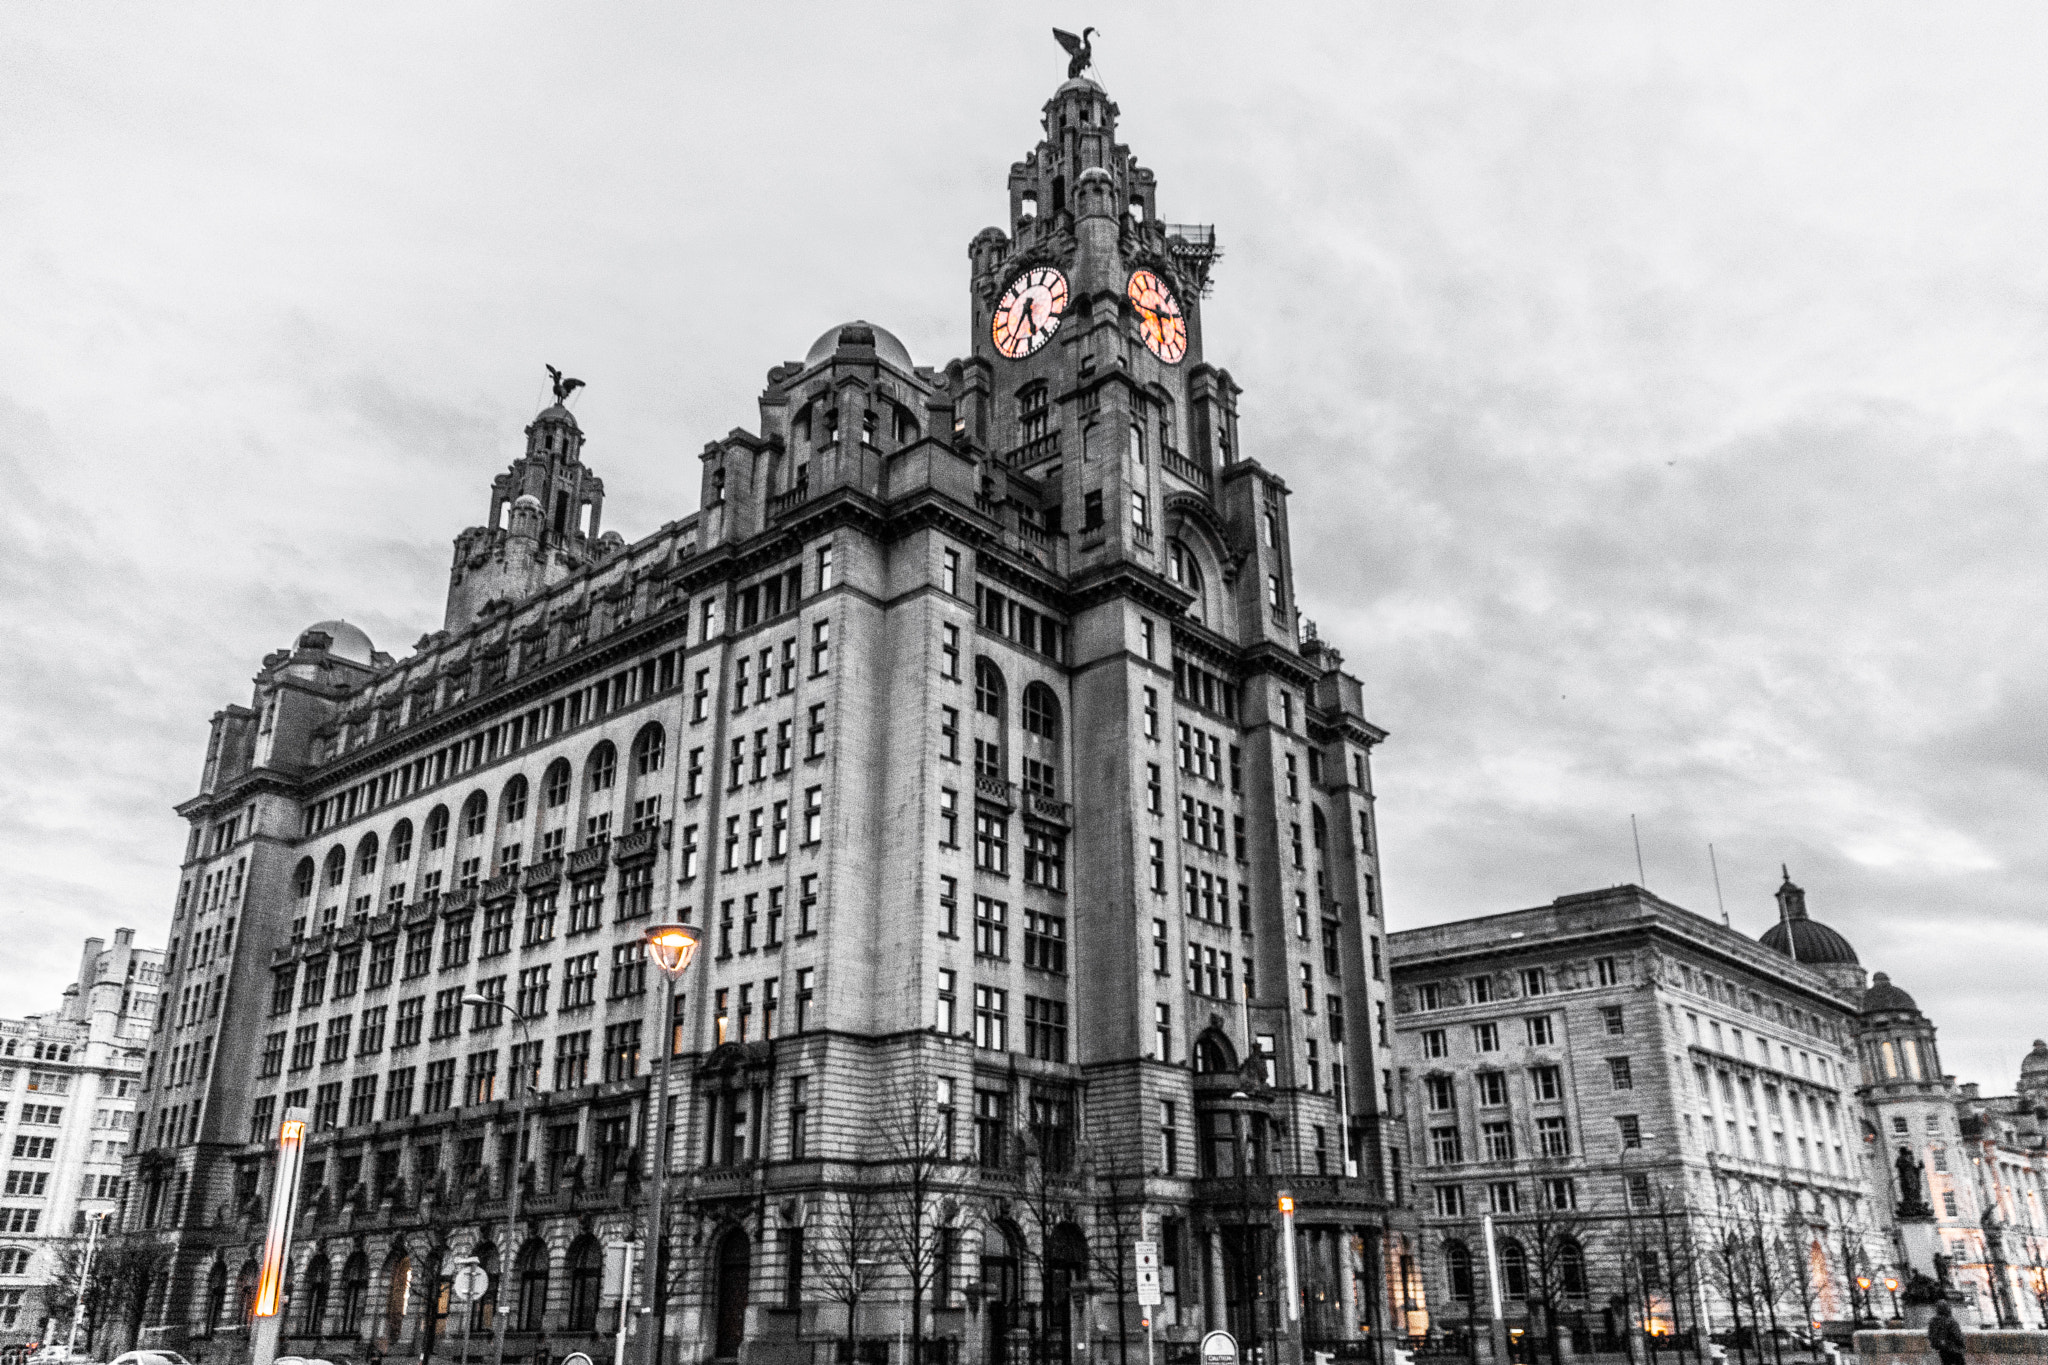 Sony SLT-A77 + Tamron 18-270mm F3.5-6.3 Di II PZD sample photo. Liver building photography